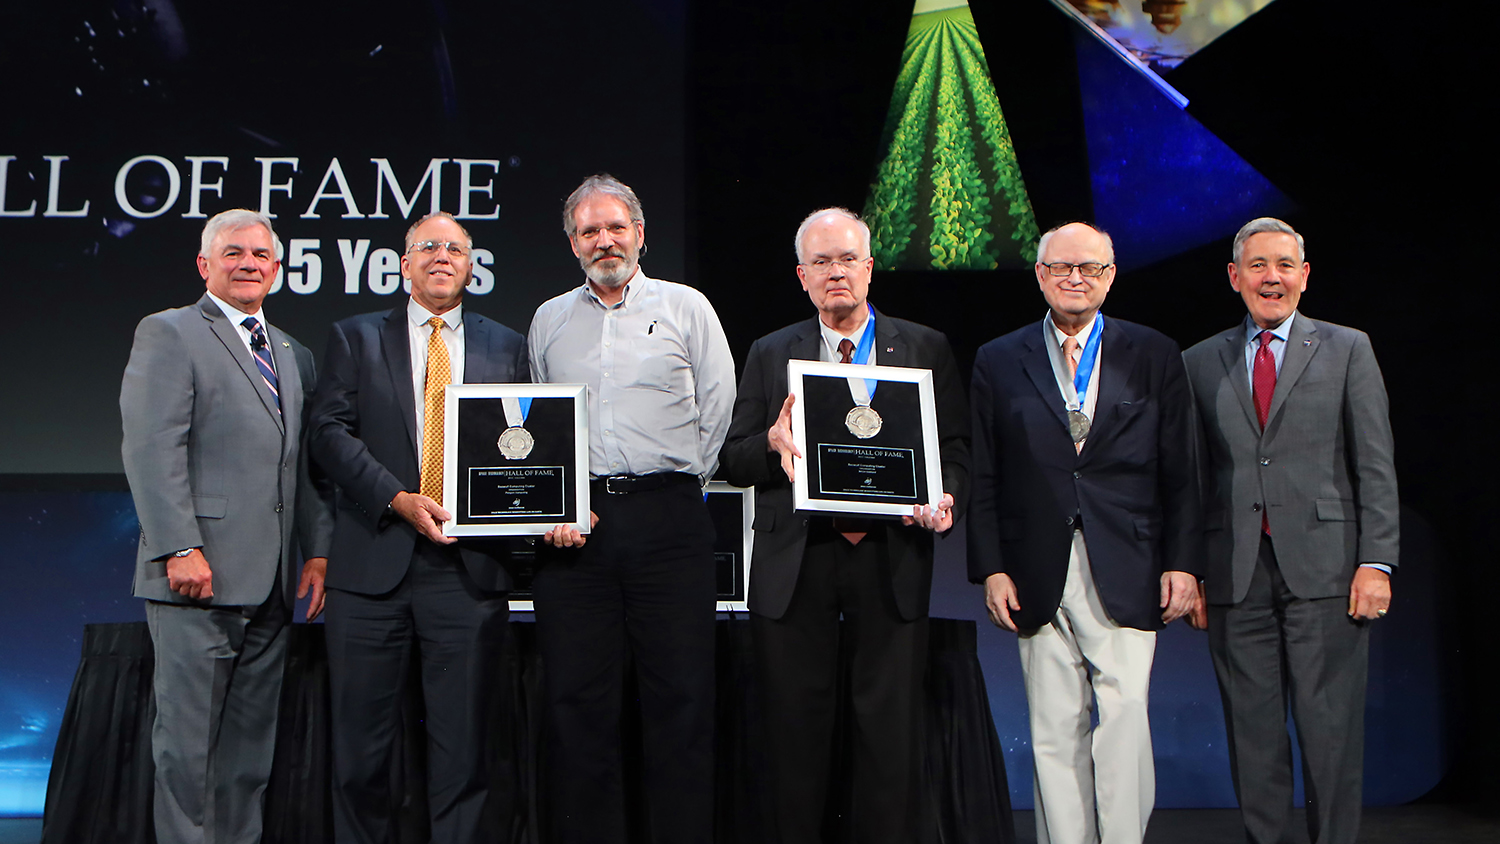 Fischer, third from right, at the 2022 Space Technology Hall of Fame induction ceremony with T. E. Zelibor, Rear Admiral, U.S. Navy (Ret.), CEO Space Foundation; Sid Mair, President and CEO, Penguin Computing; Philip Pokorny, CTO, Penguin Computing; Sterling; and Robert D. Cabana, NASA Associate Administrator.